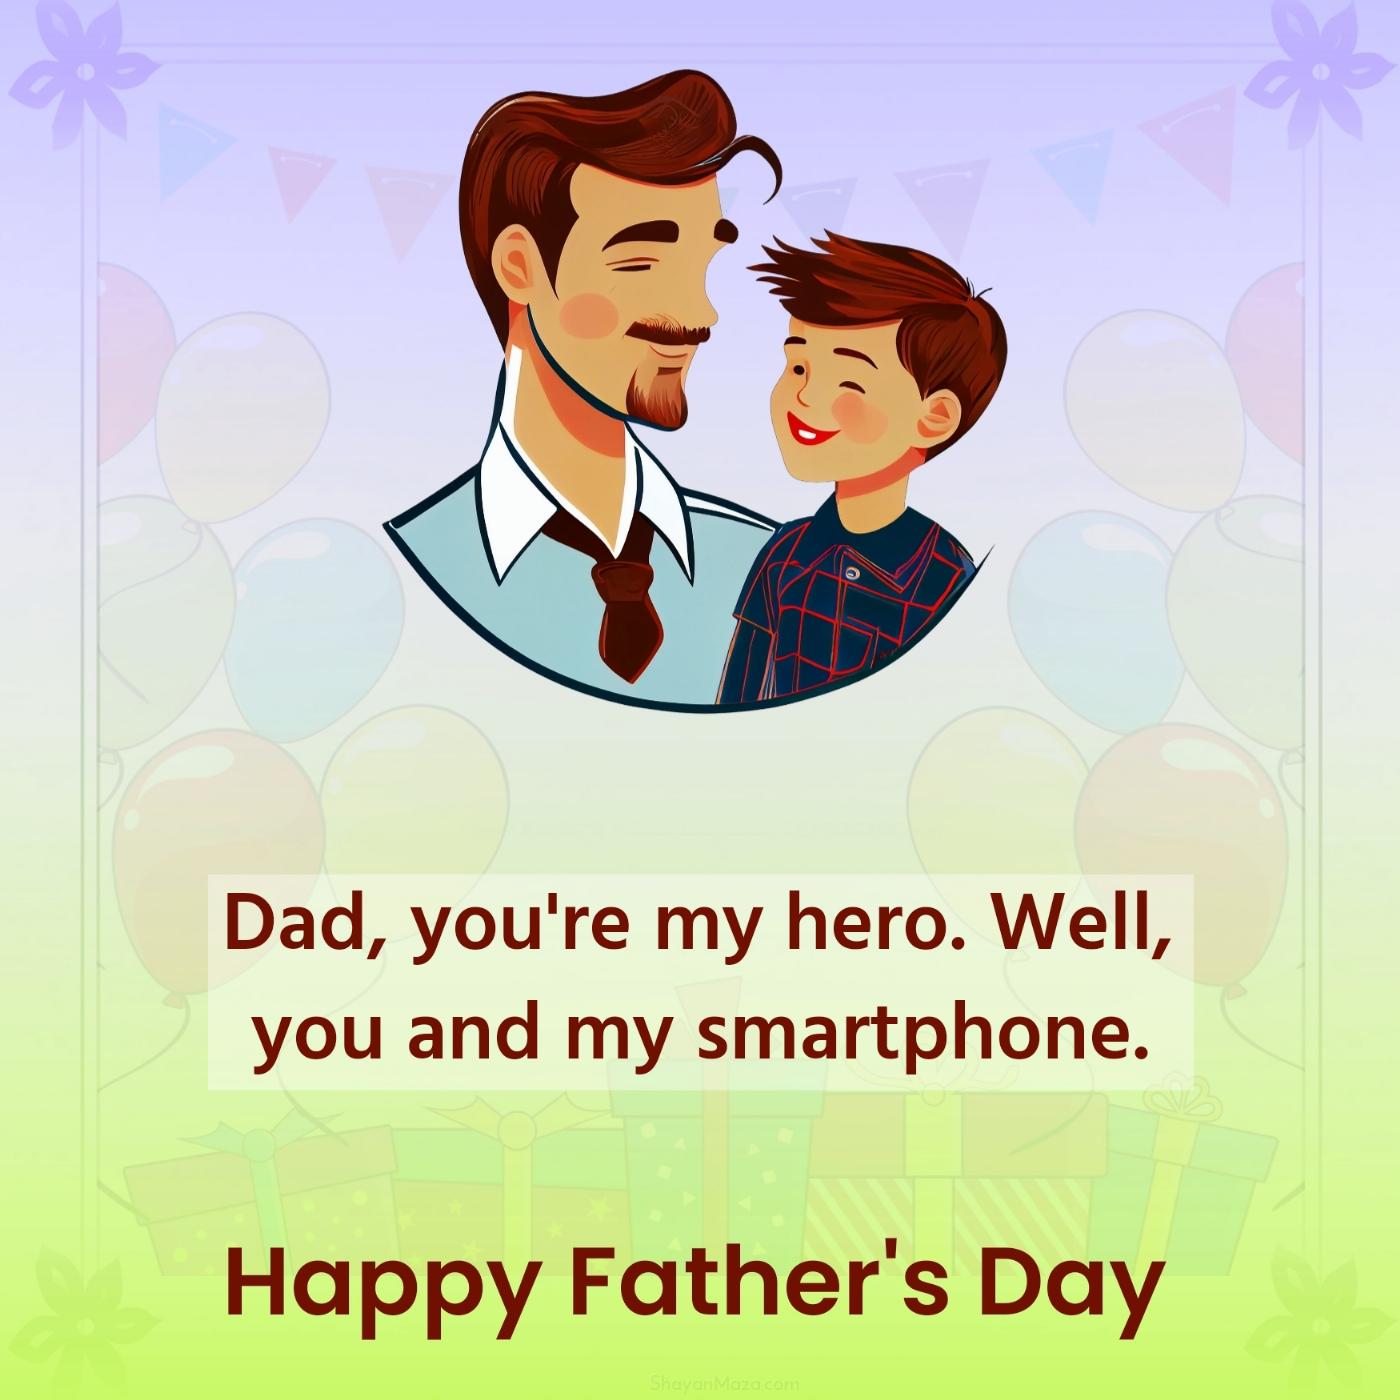 Dad you're my hero Well you and my smartphone